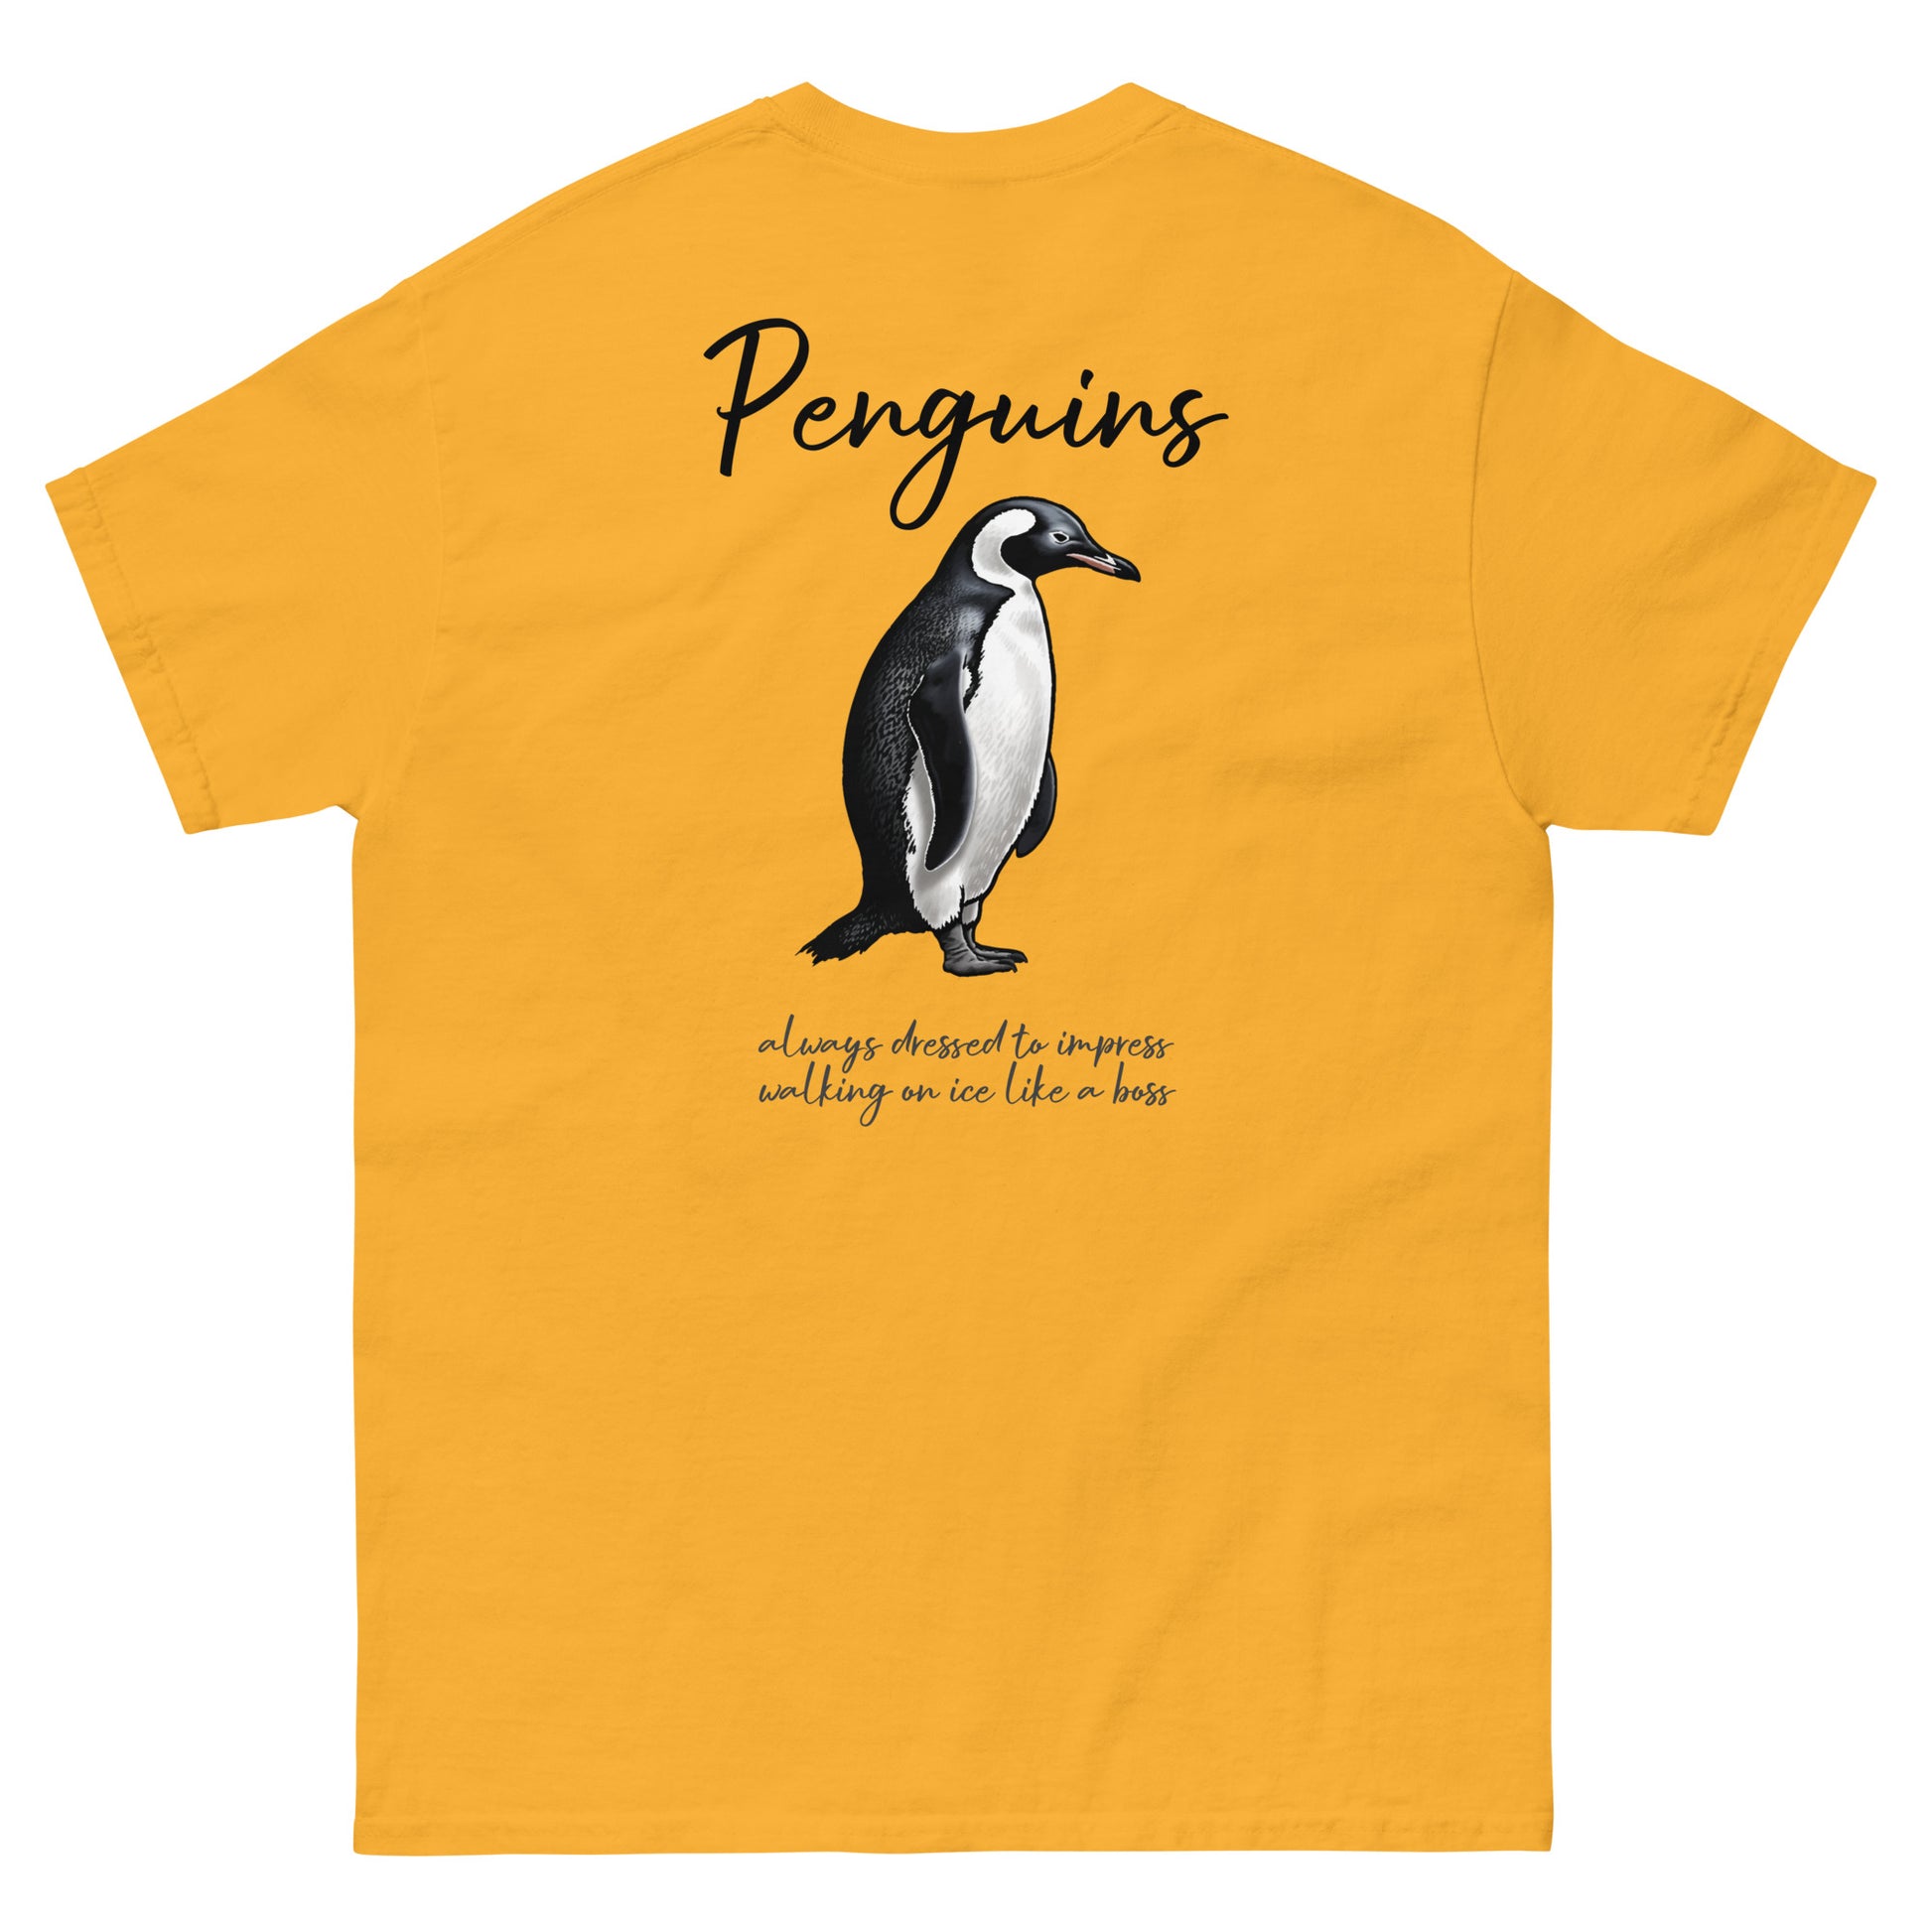 Yellow High Quality Tee - Front Design with a Penguin on left chest - Back Design with a Penguin and a Phrase "Penguins:always dressed to impress, walking on ice like a boss" print